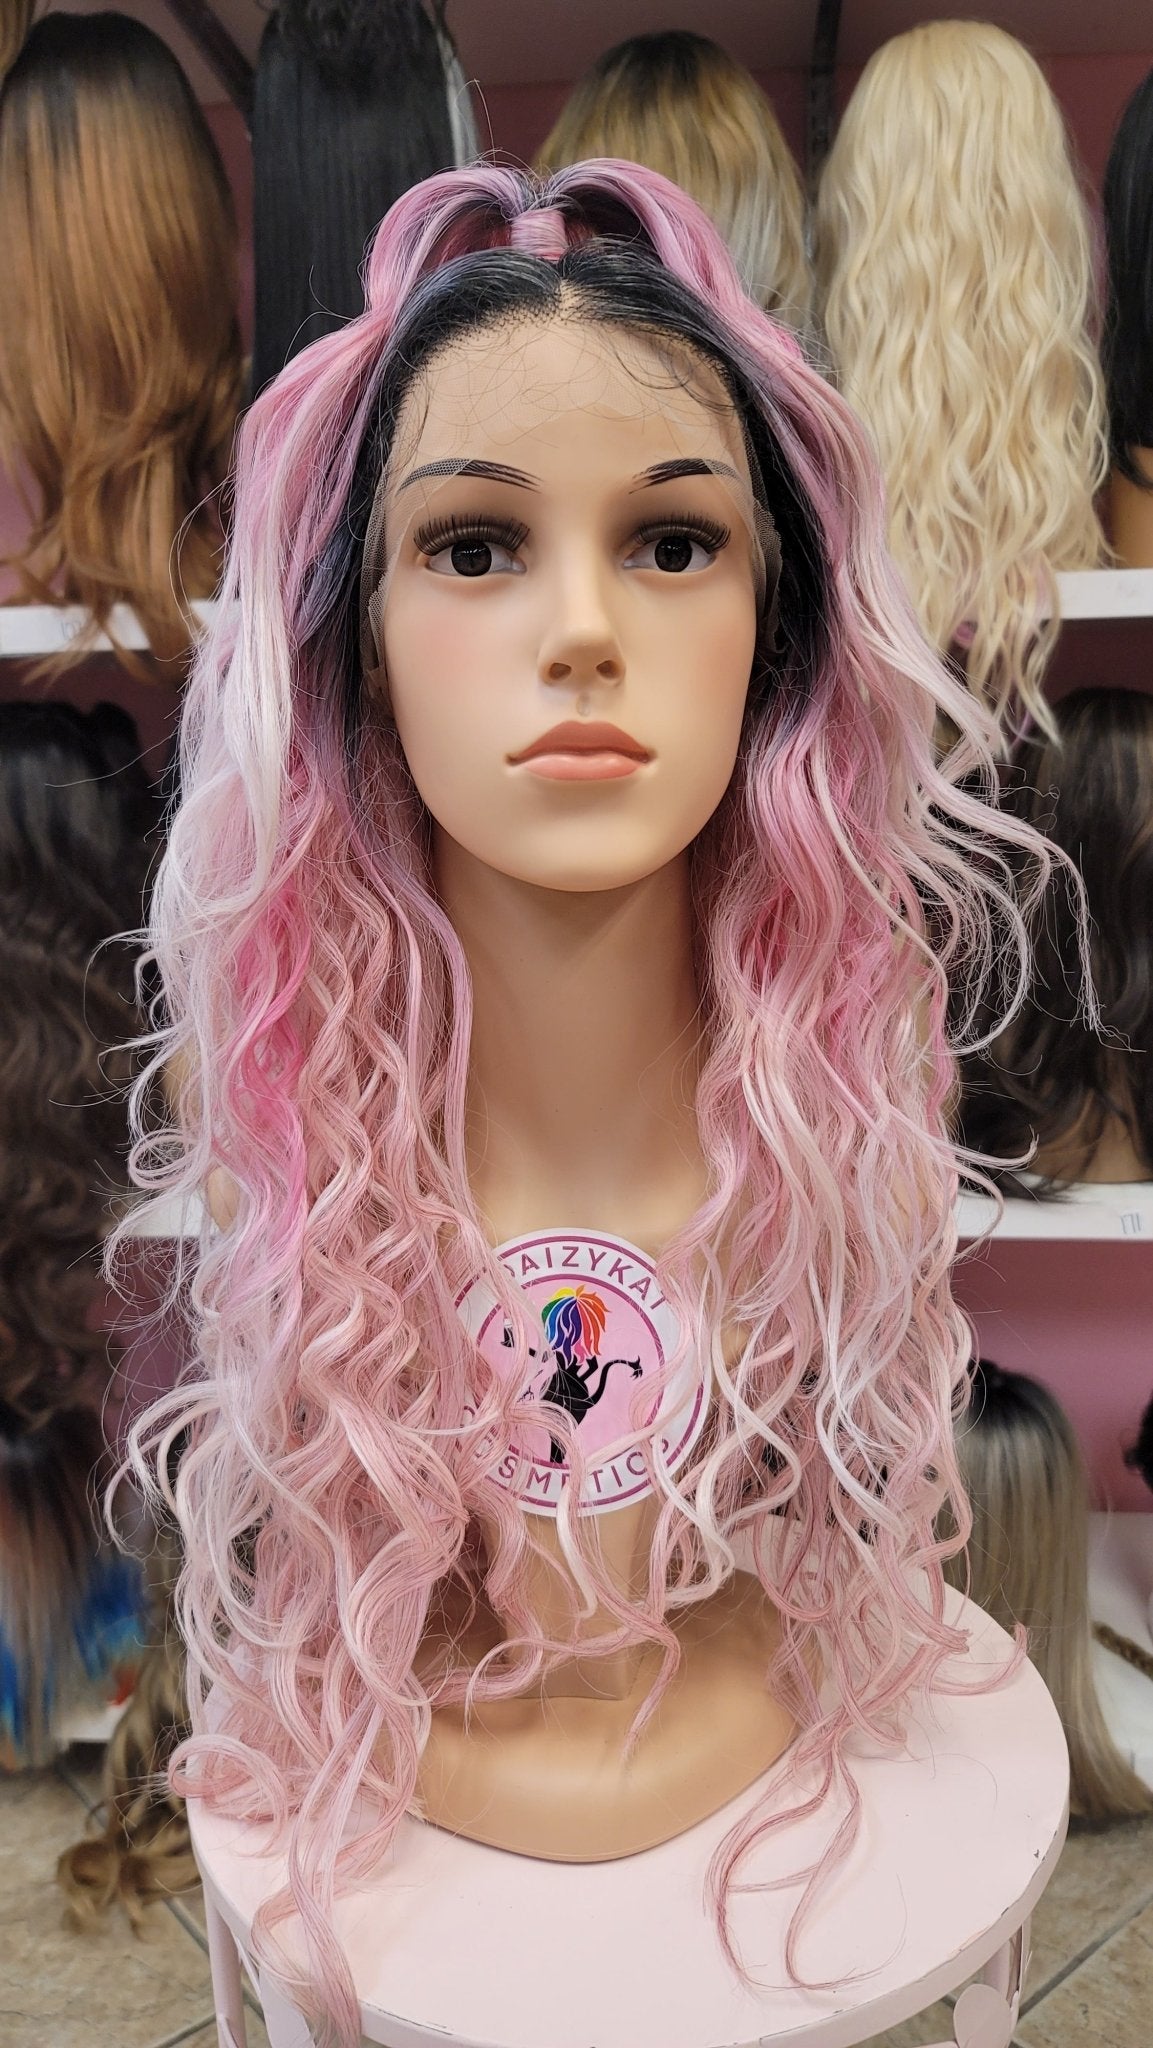 145 Jolene - 13x2 & 360 Top Pony Lace Front Wig - 1B/PINK - DaizyKat Cosmetics 145 Jolene - 13x2 & 360 Top Pony Lace Front Wig - 1B/PINK DaizyKat Cosmetics WIGS